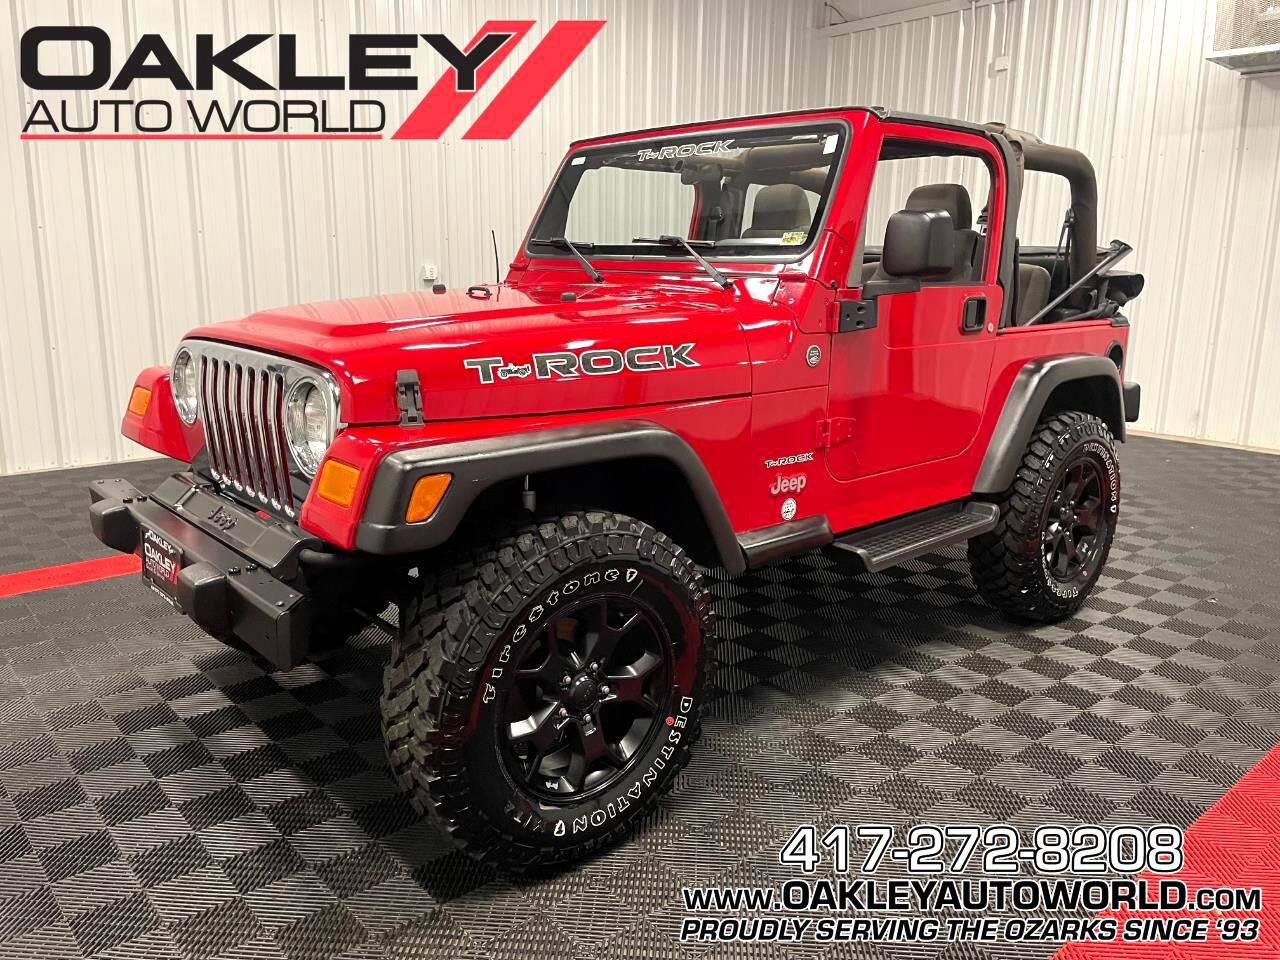 Used 2006 Jeep Wrangler T-ROCK X Lifted 4x4 for Sale in Branson West MO  65737 Oakley Auto World